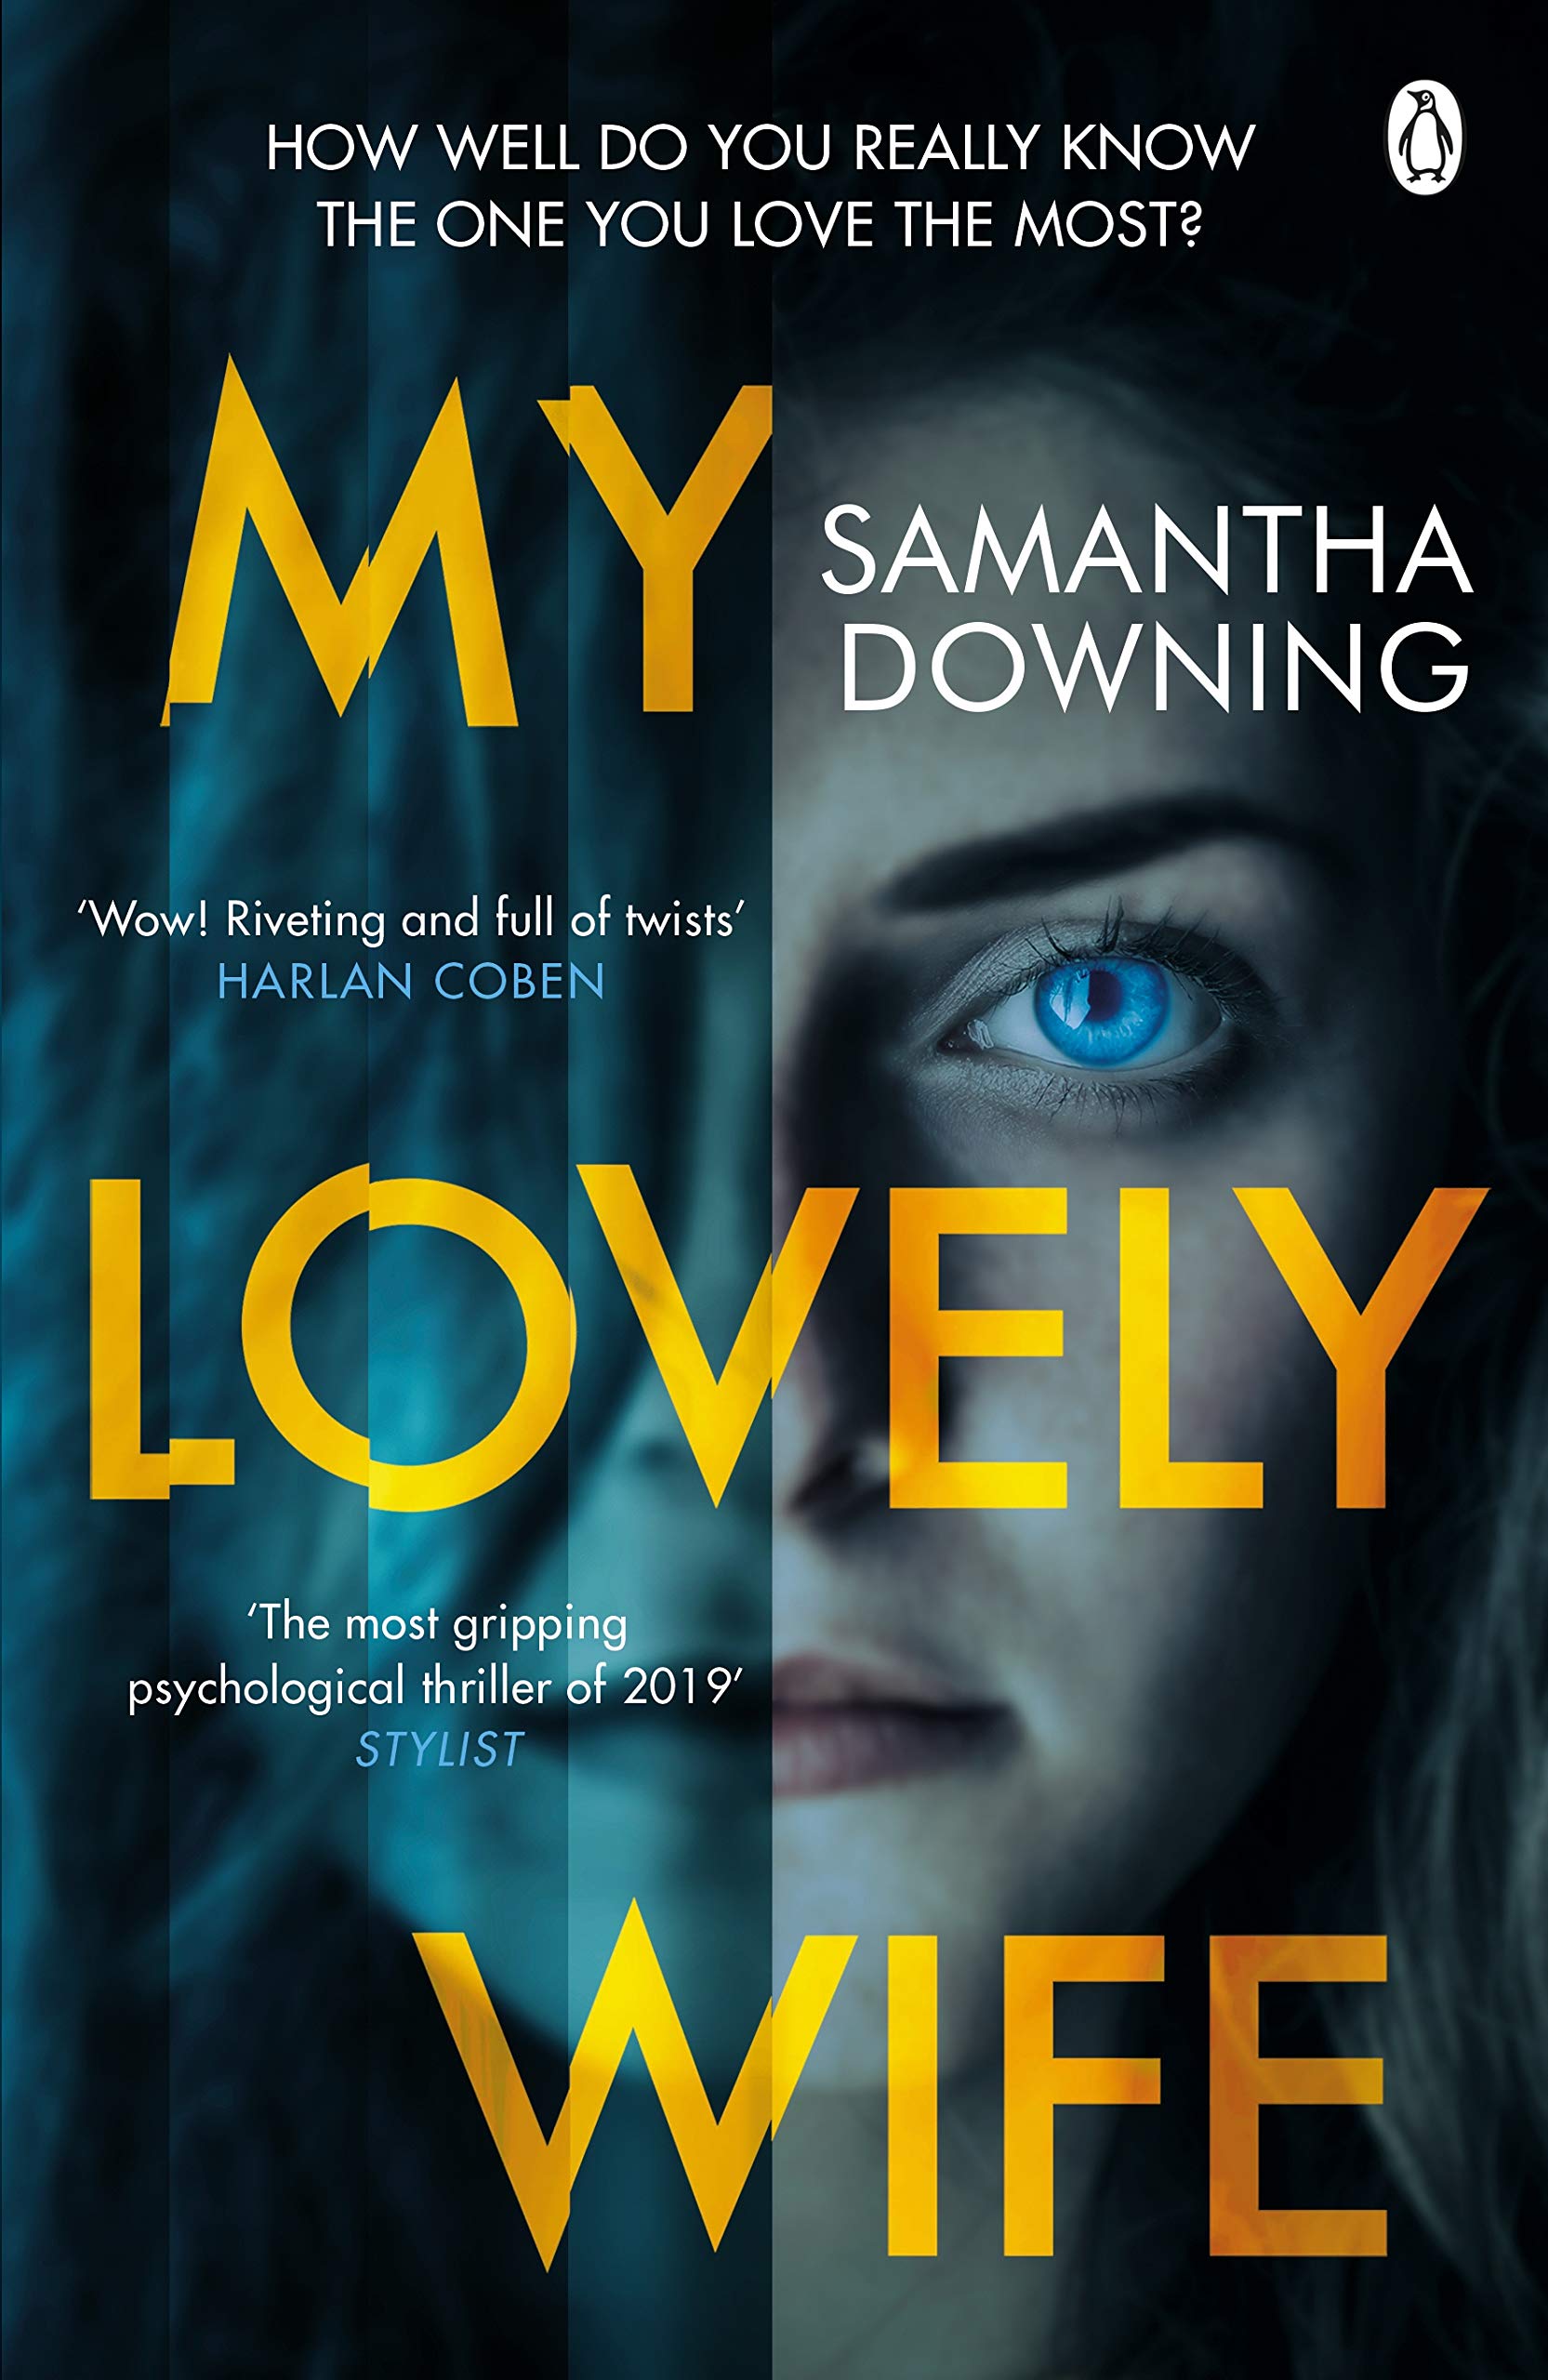 My Lovely Wife | Samantha Downing